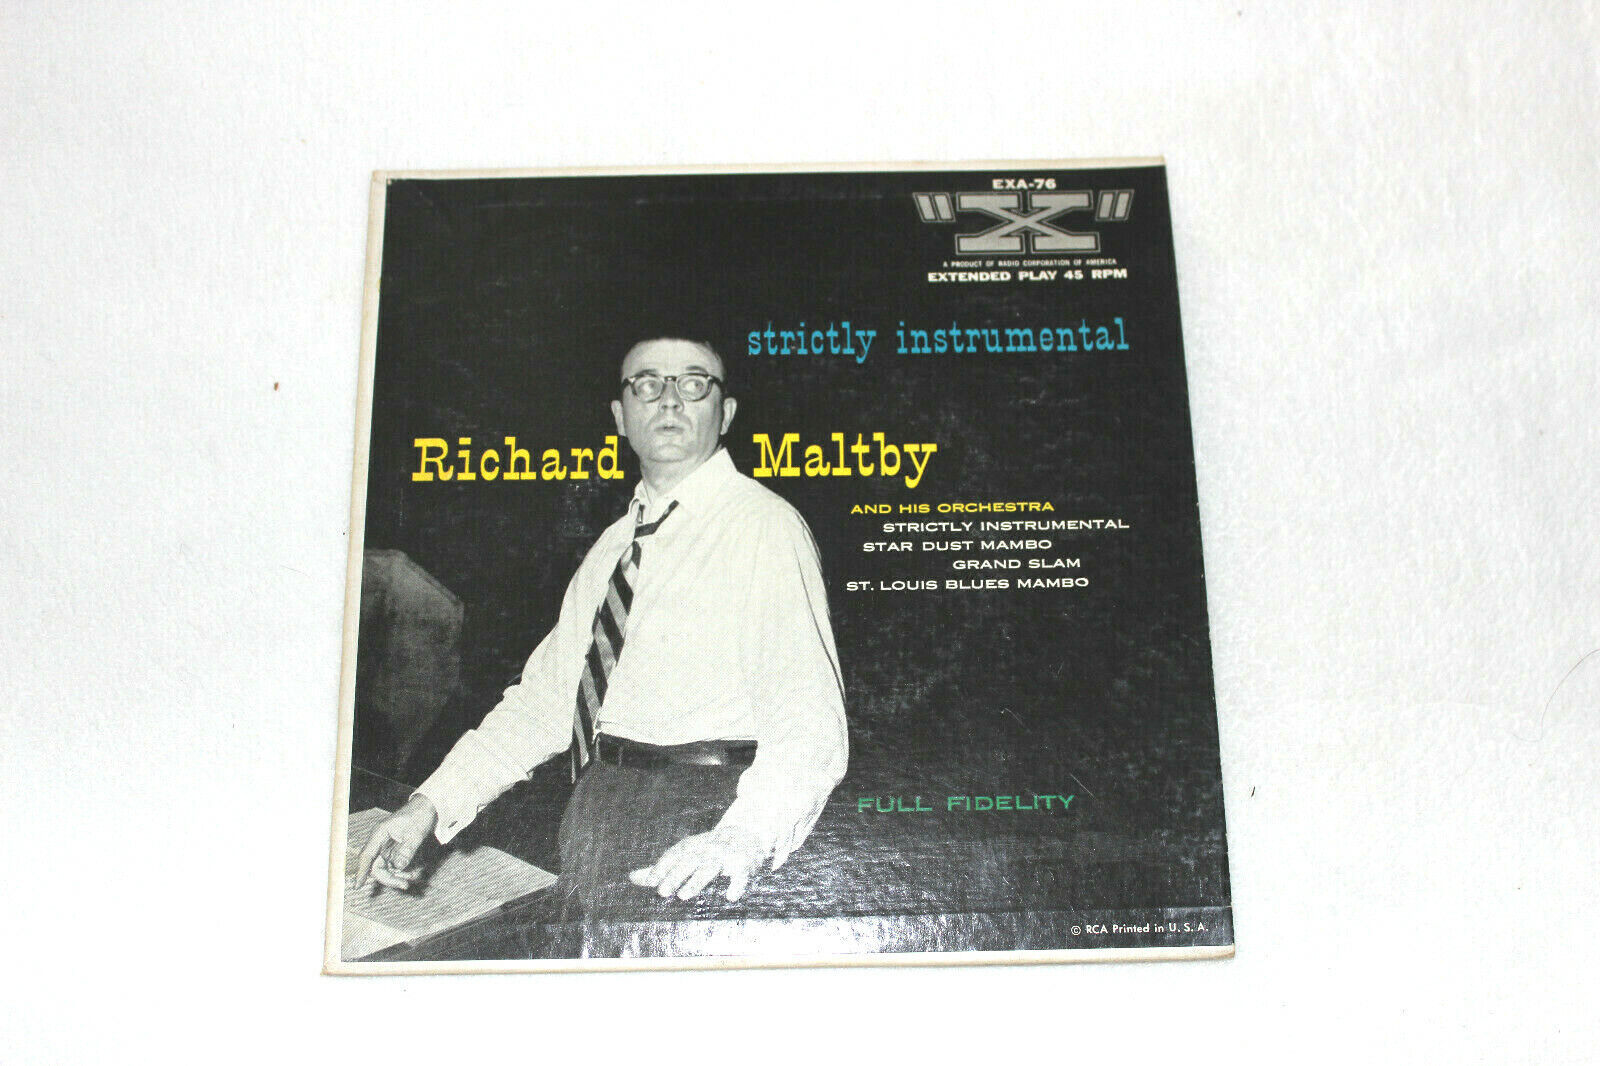 Primary image for 45 EP Richard Maltby EXA 76 Strictly Instrumental 7” Vinyl + Cardboard Sleeve